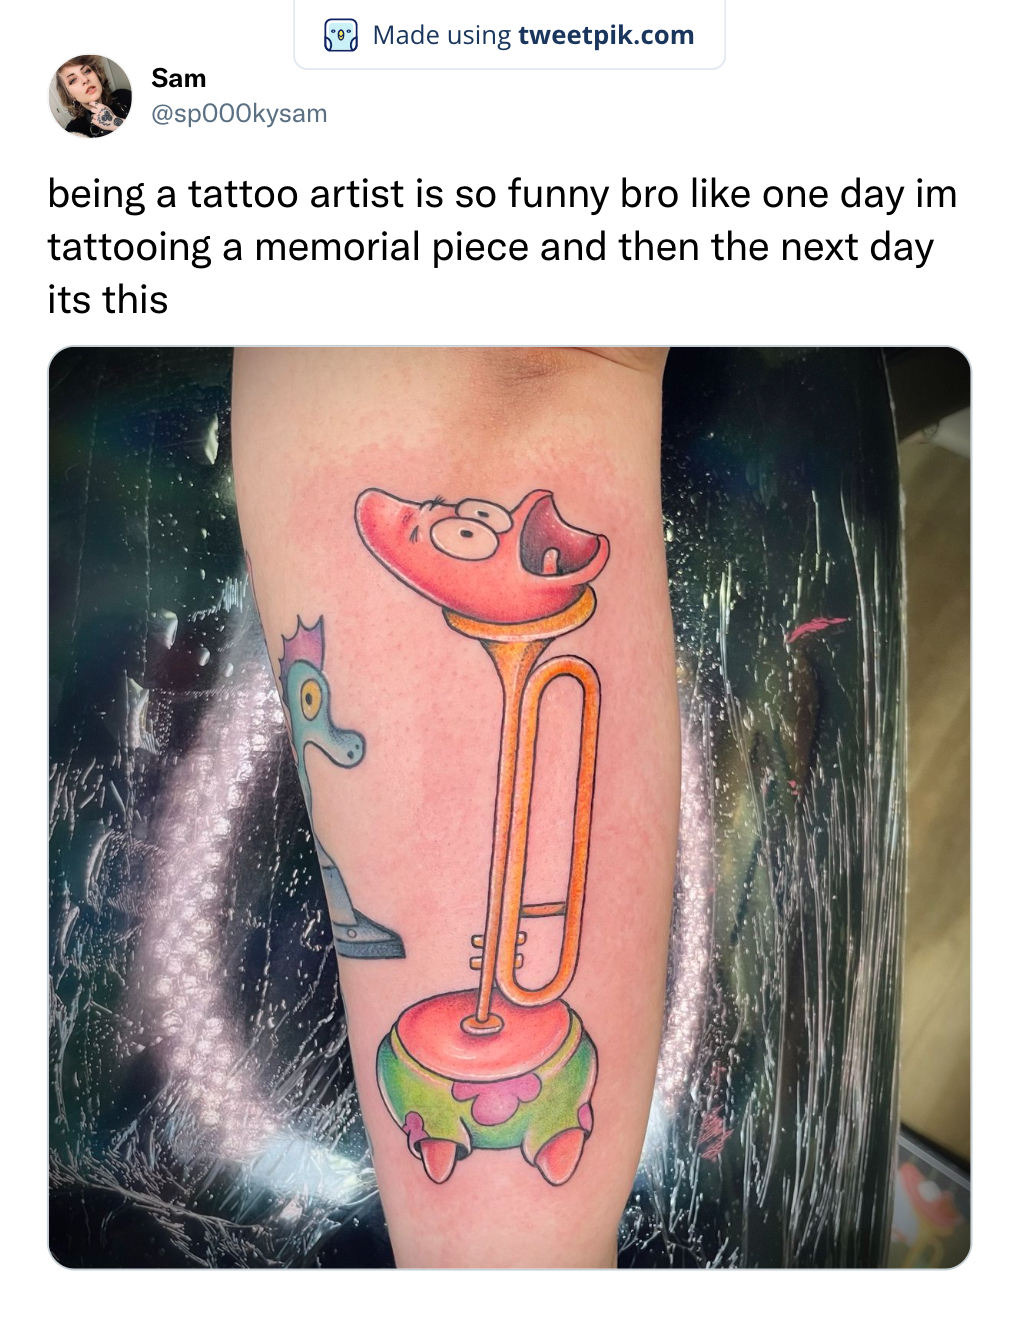 twitter memes - arm - Made using tweetpik.com Sam Espookysam being a tattoo artist is so funny bro one day im tattooing a memorial piece and then the next day its this